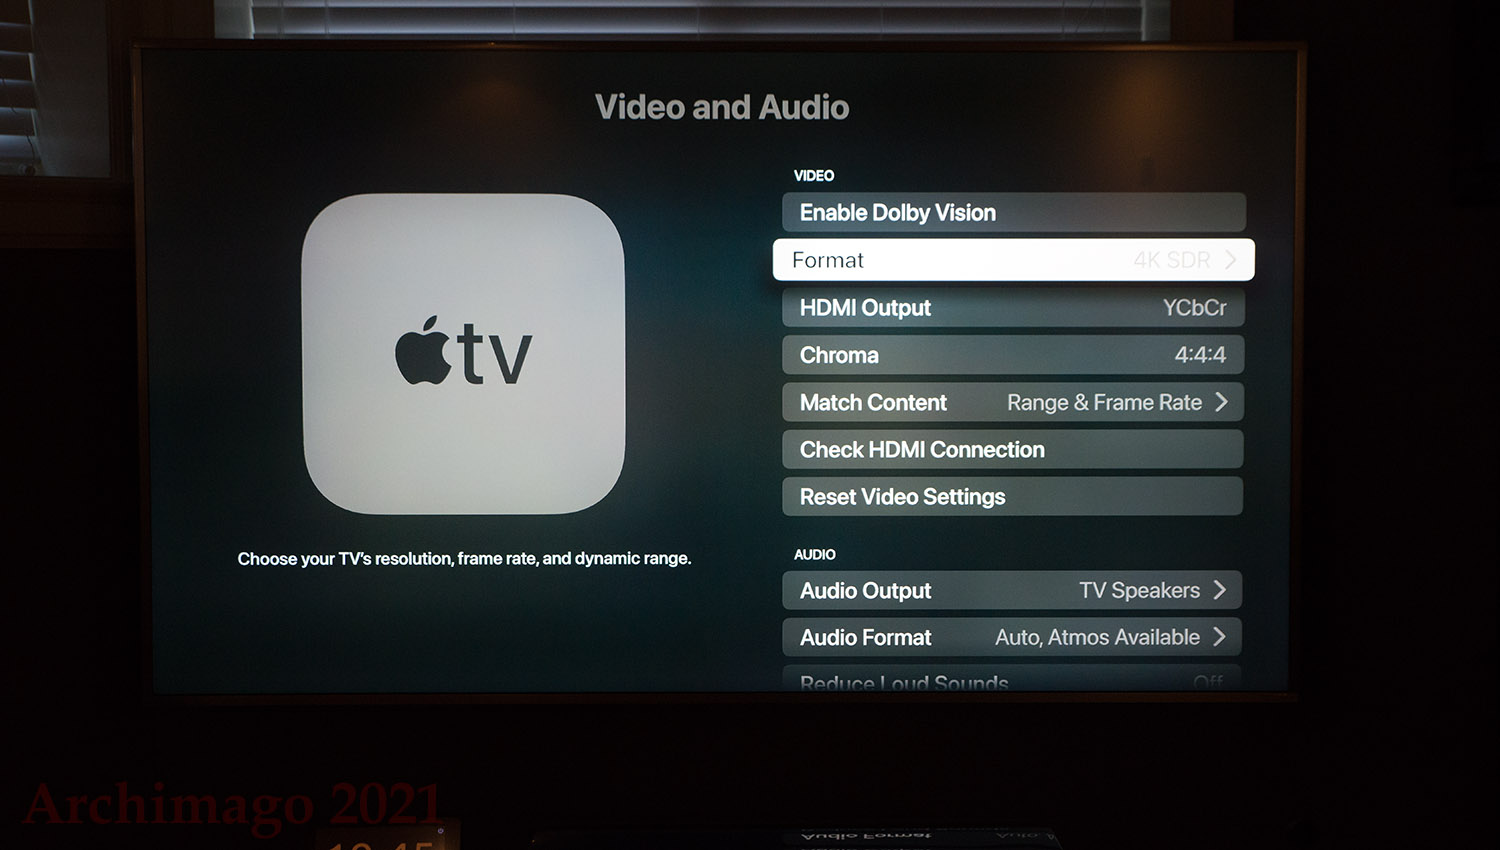 Enable Dolby Digital: Learn how to activate Dolby Digital audio on your Apple TV for an immersive audio experience.
Adjust Match Frame Rate Settings: Find out how to optimize the video playback on your Apple TV by enabling the match frame rate feature.